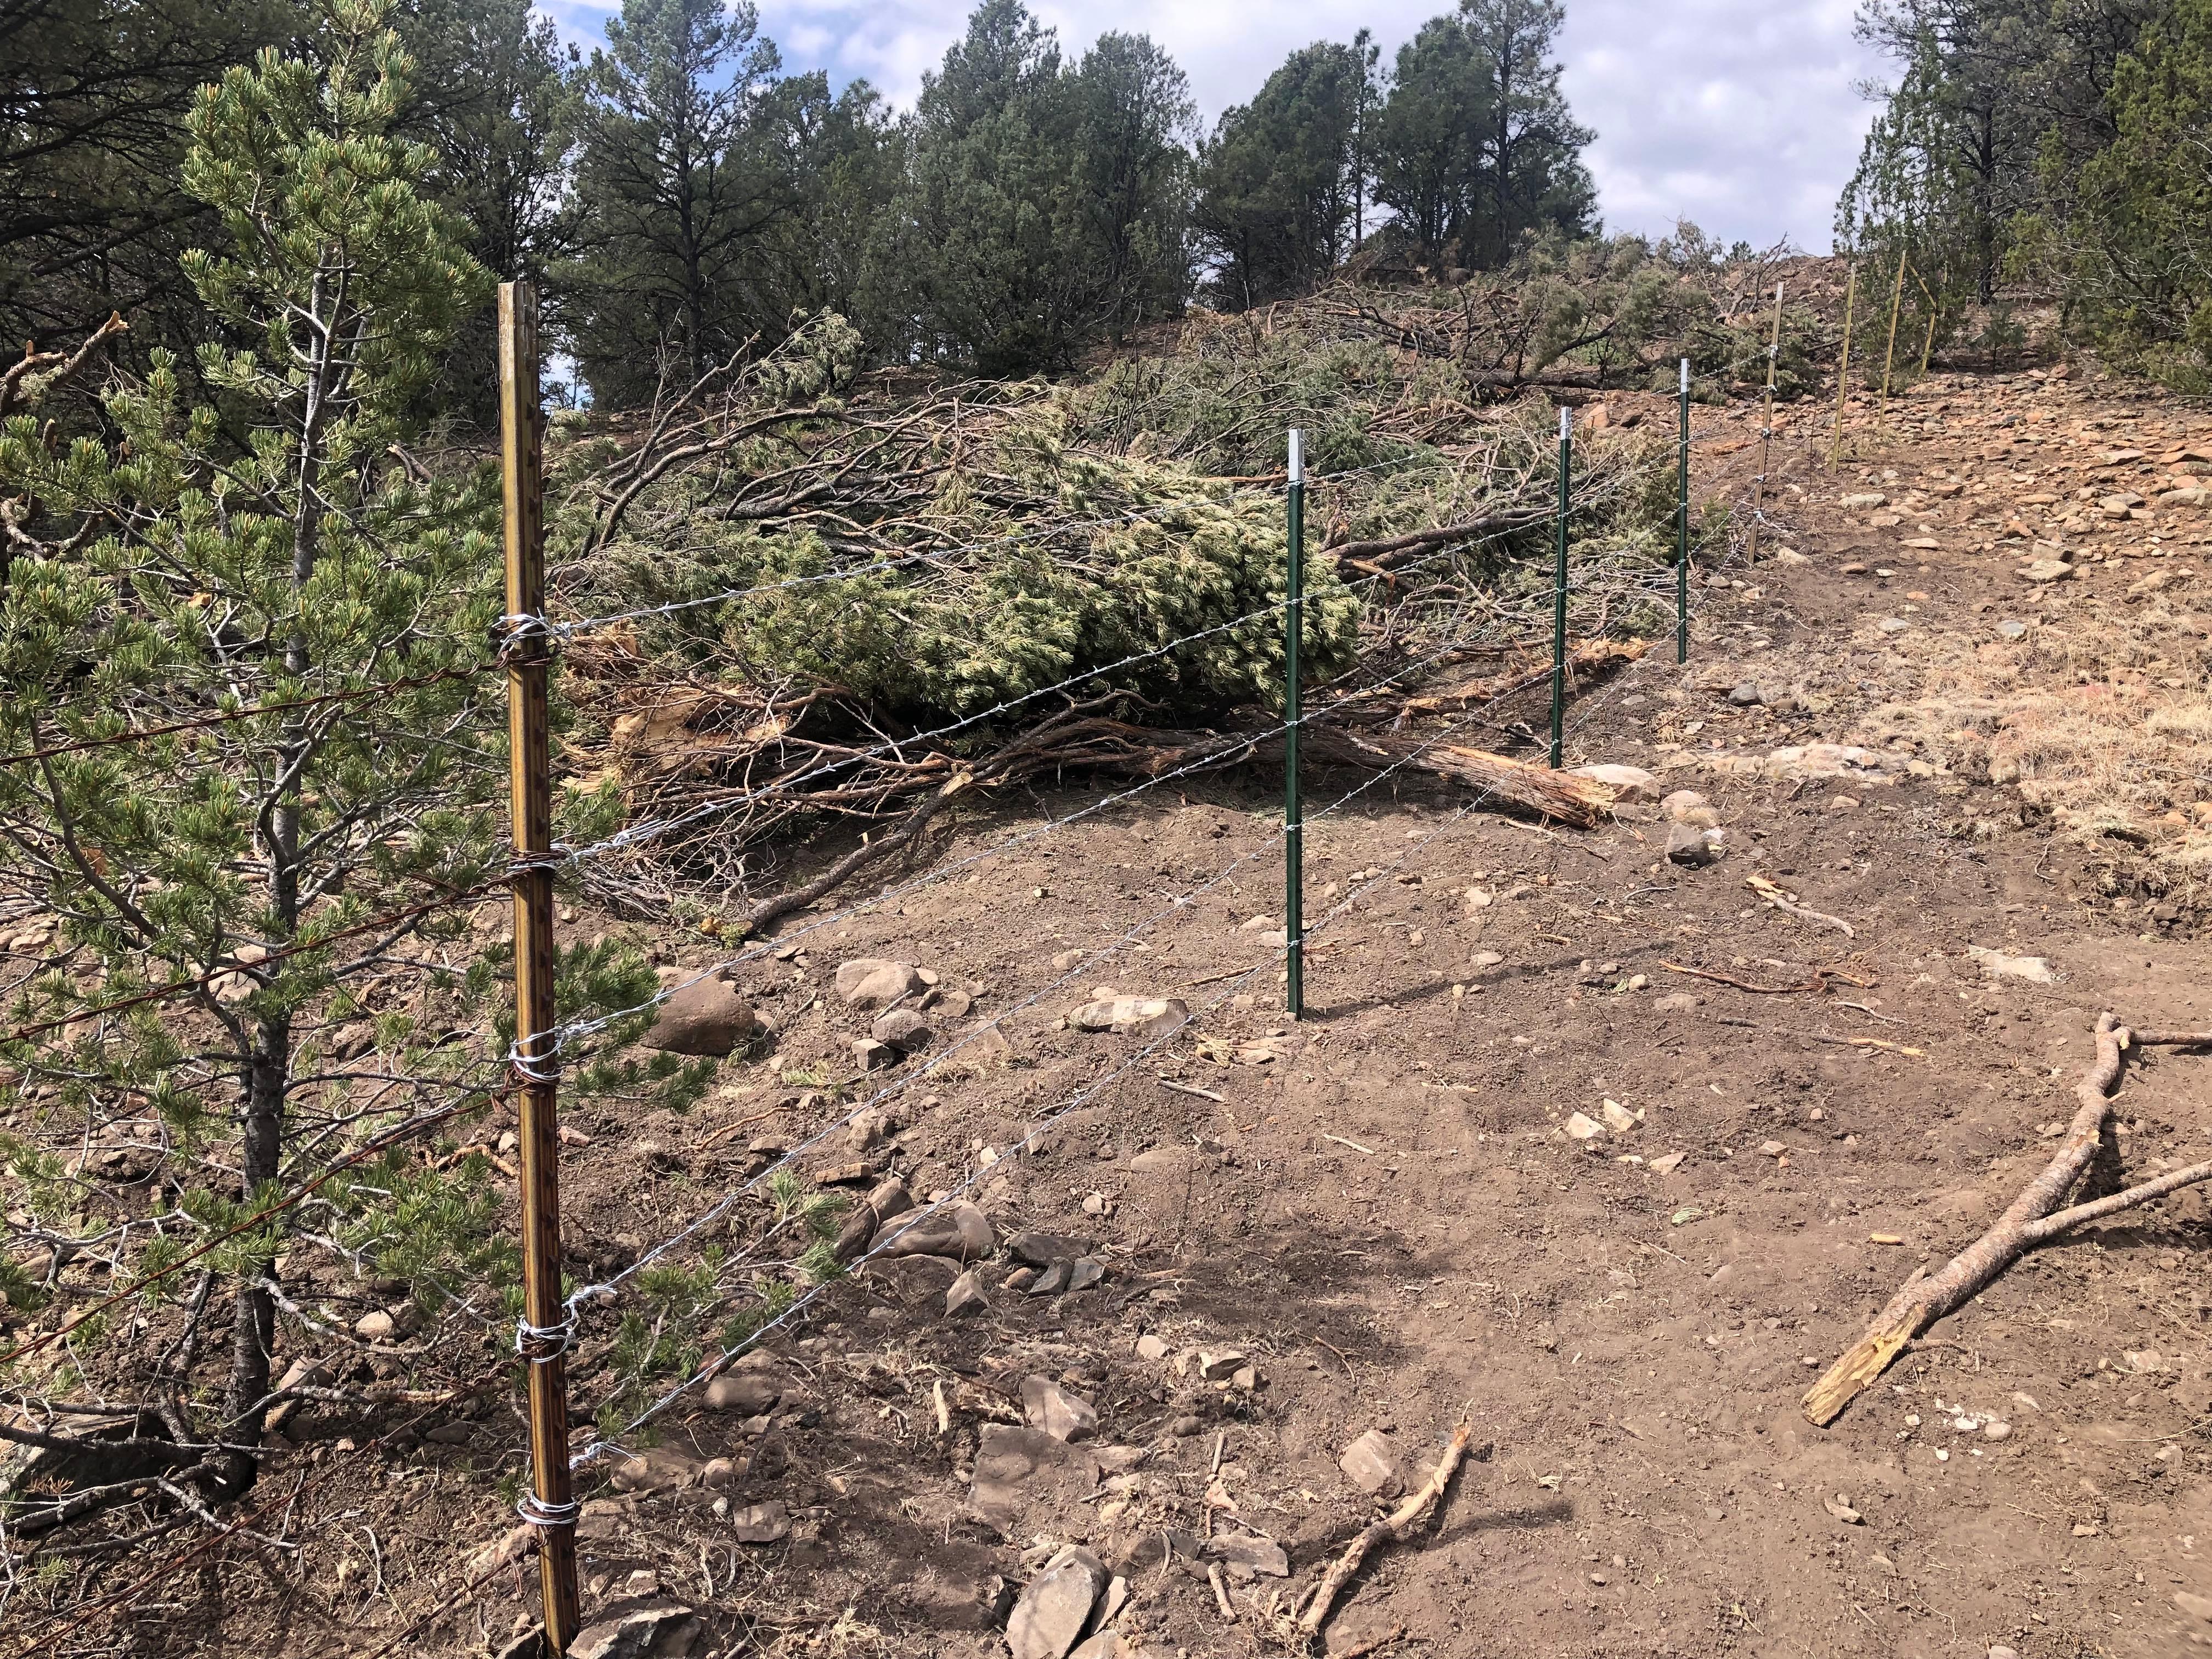 Picture shows a newly repaired four strand barbed wire fence crossing a swath of disturbed soil covered with downed trees and branches. This depicts a repaired dozer line.